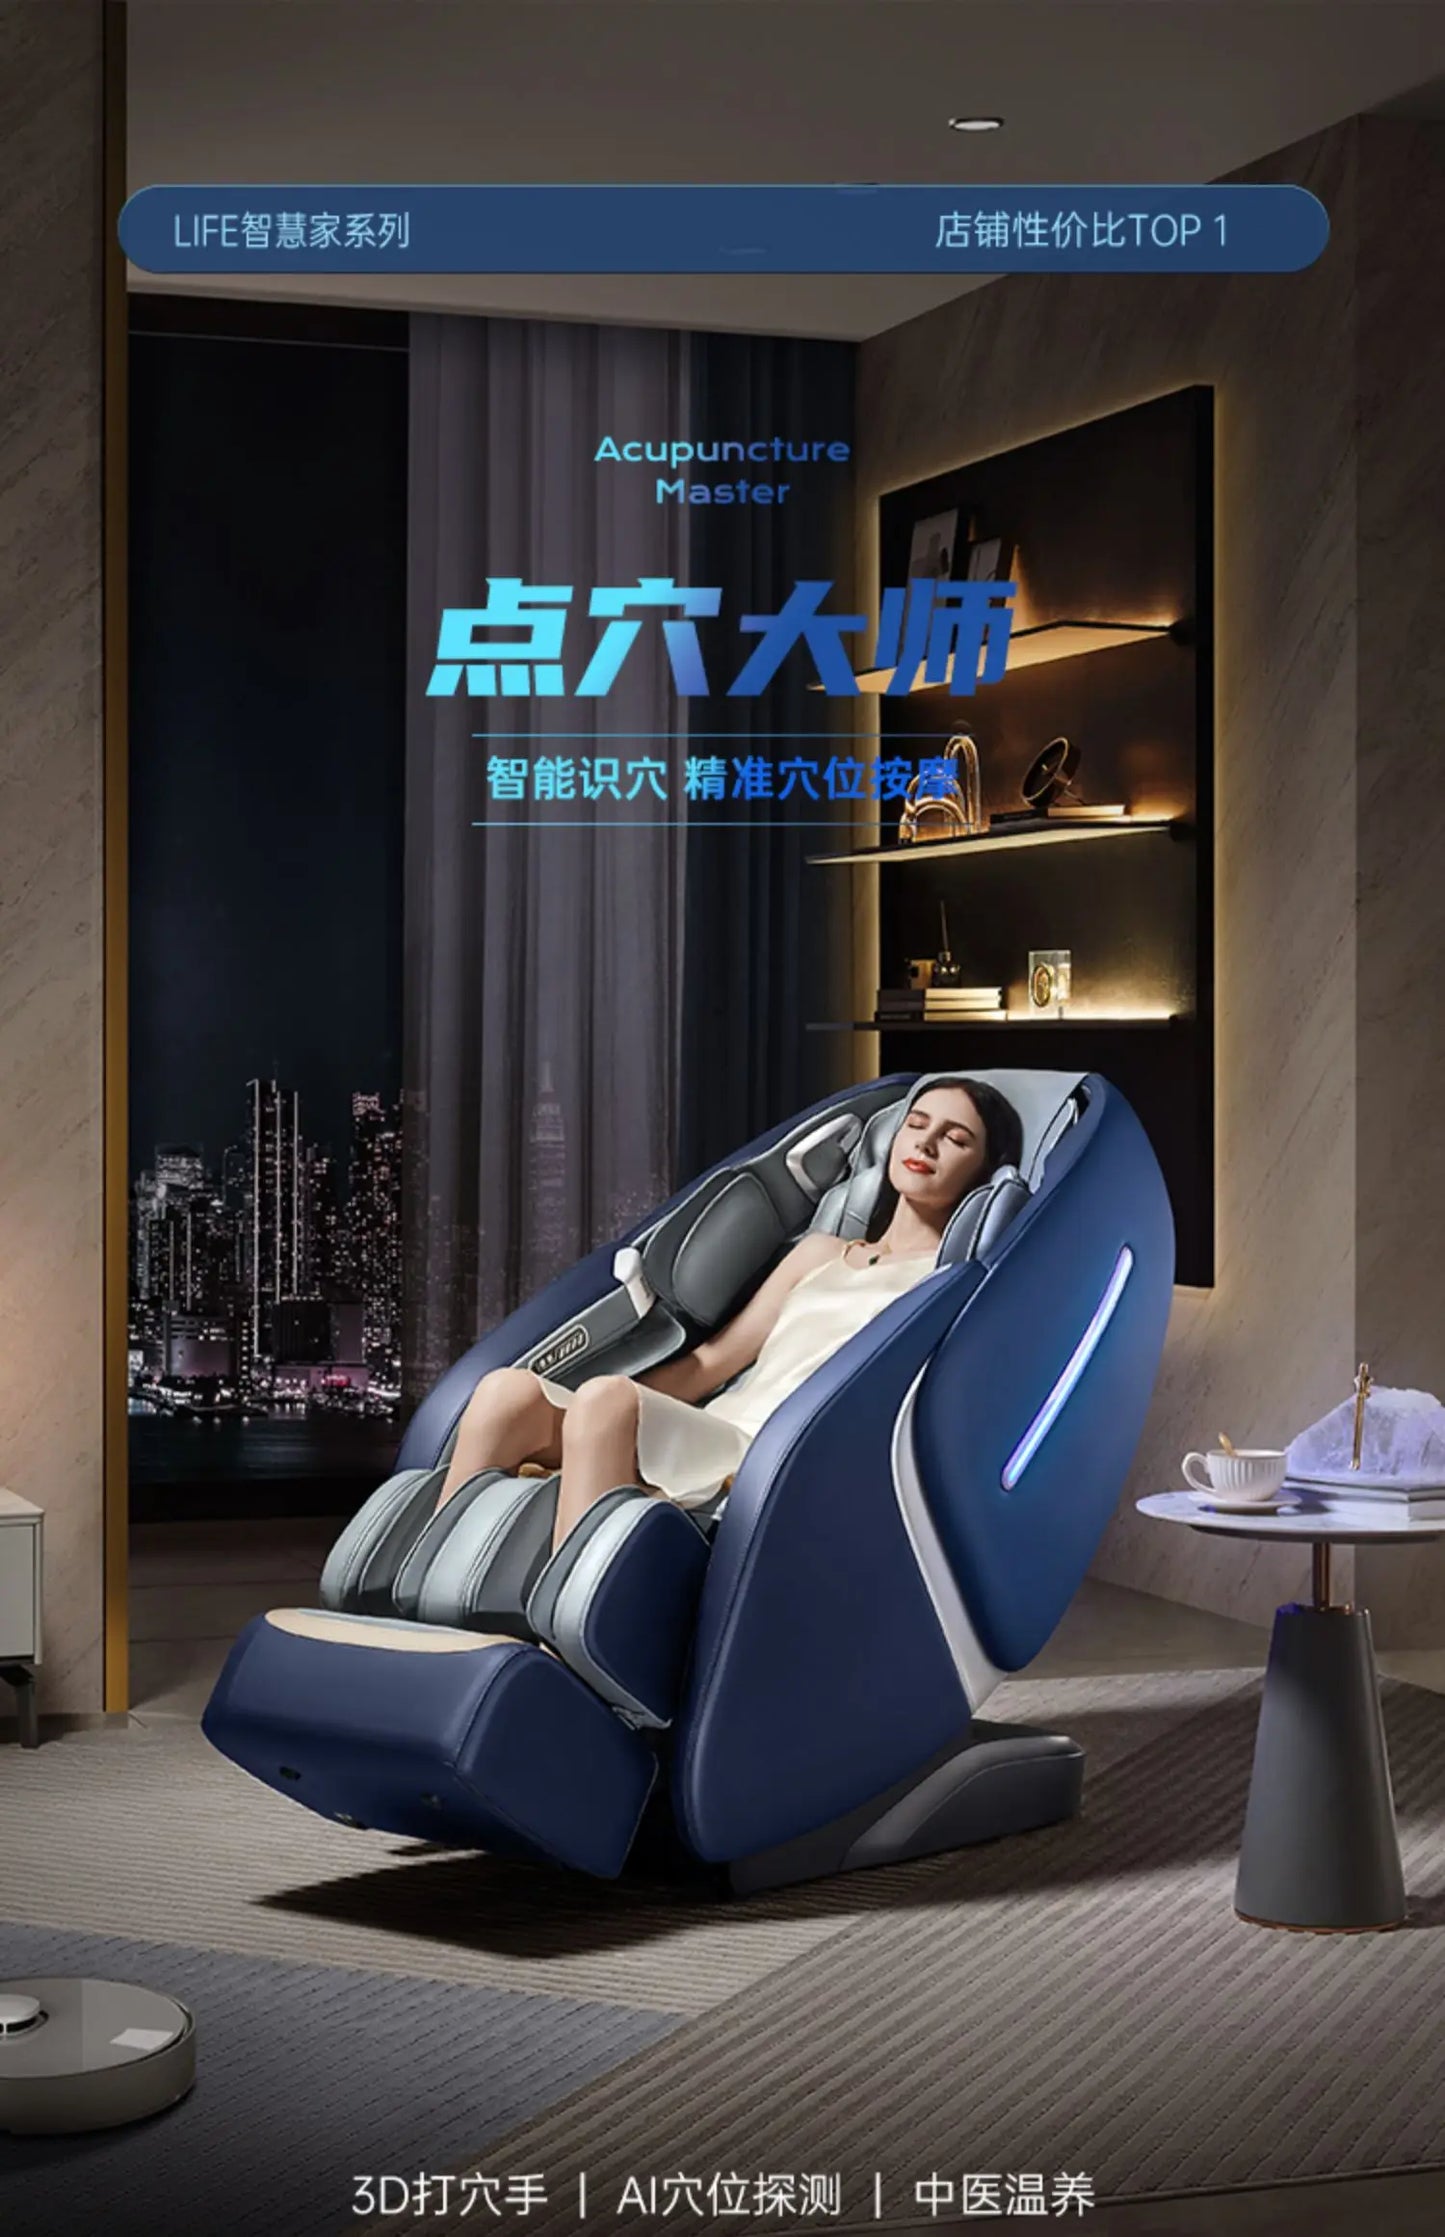 First Class Cabin Massage Chair Smart Home Full Body Luxury Automatic Electric